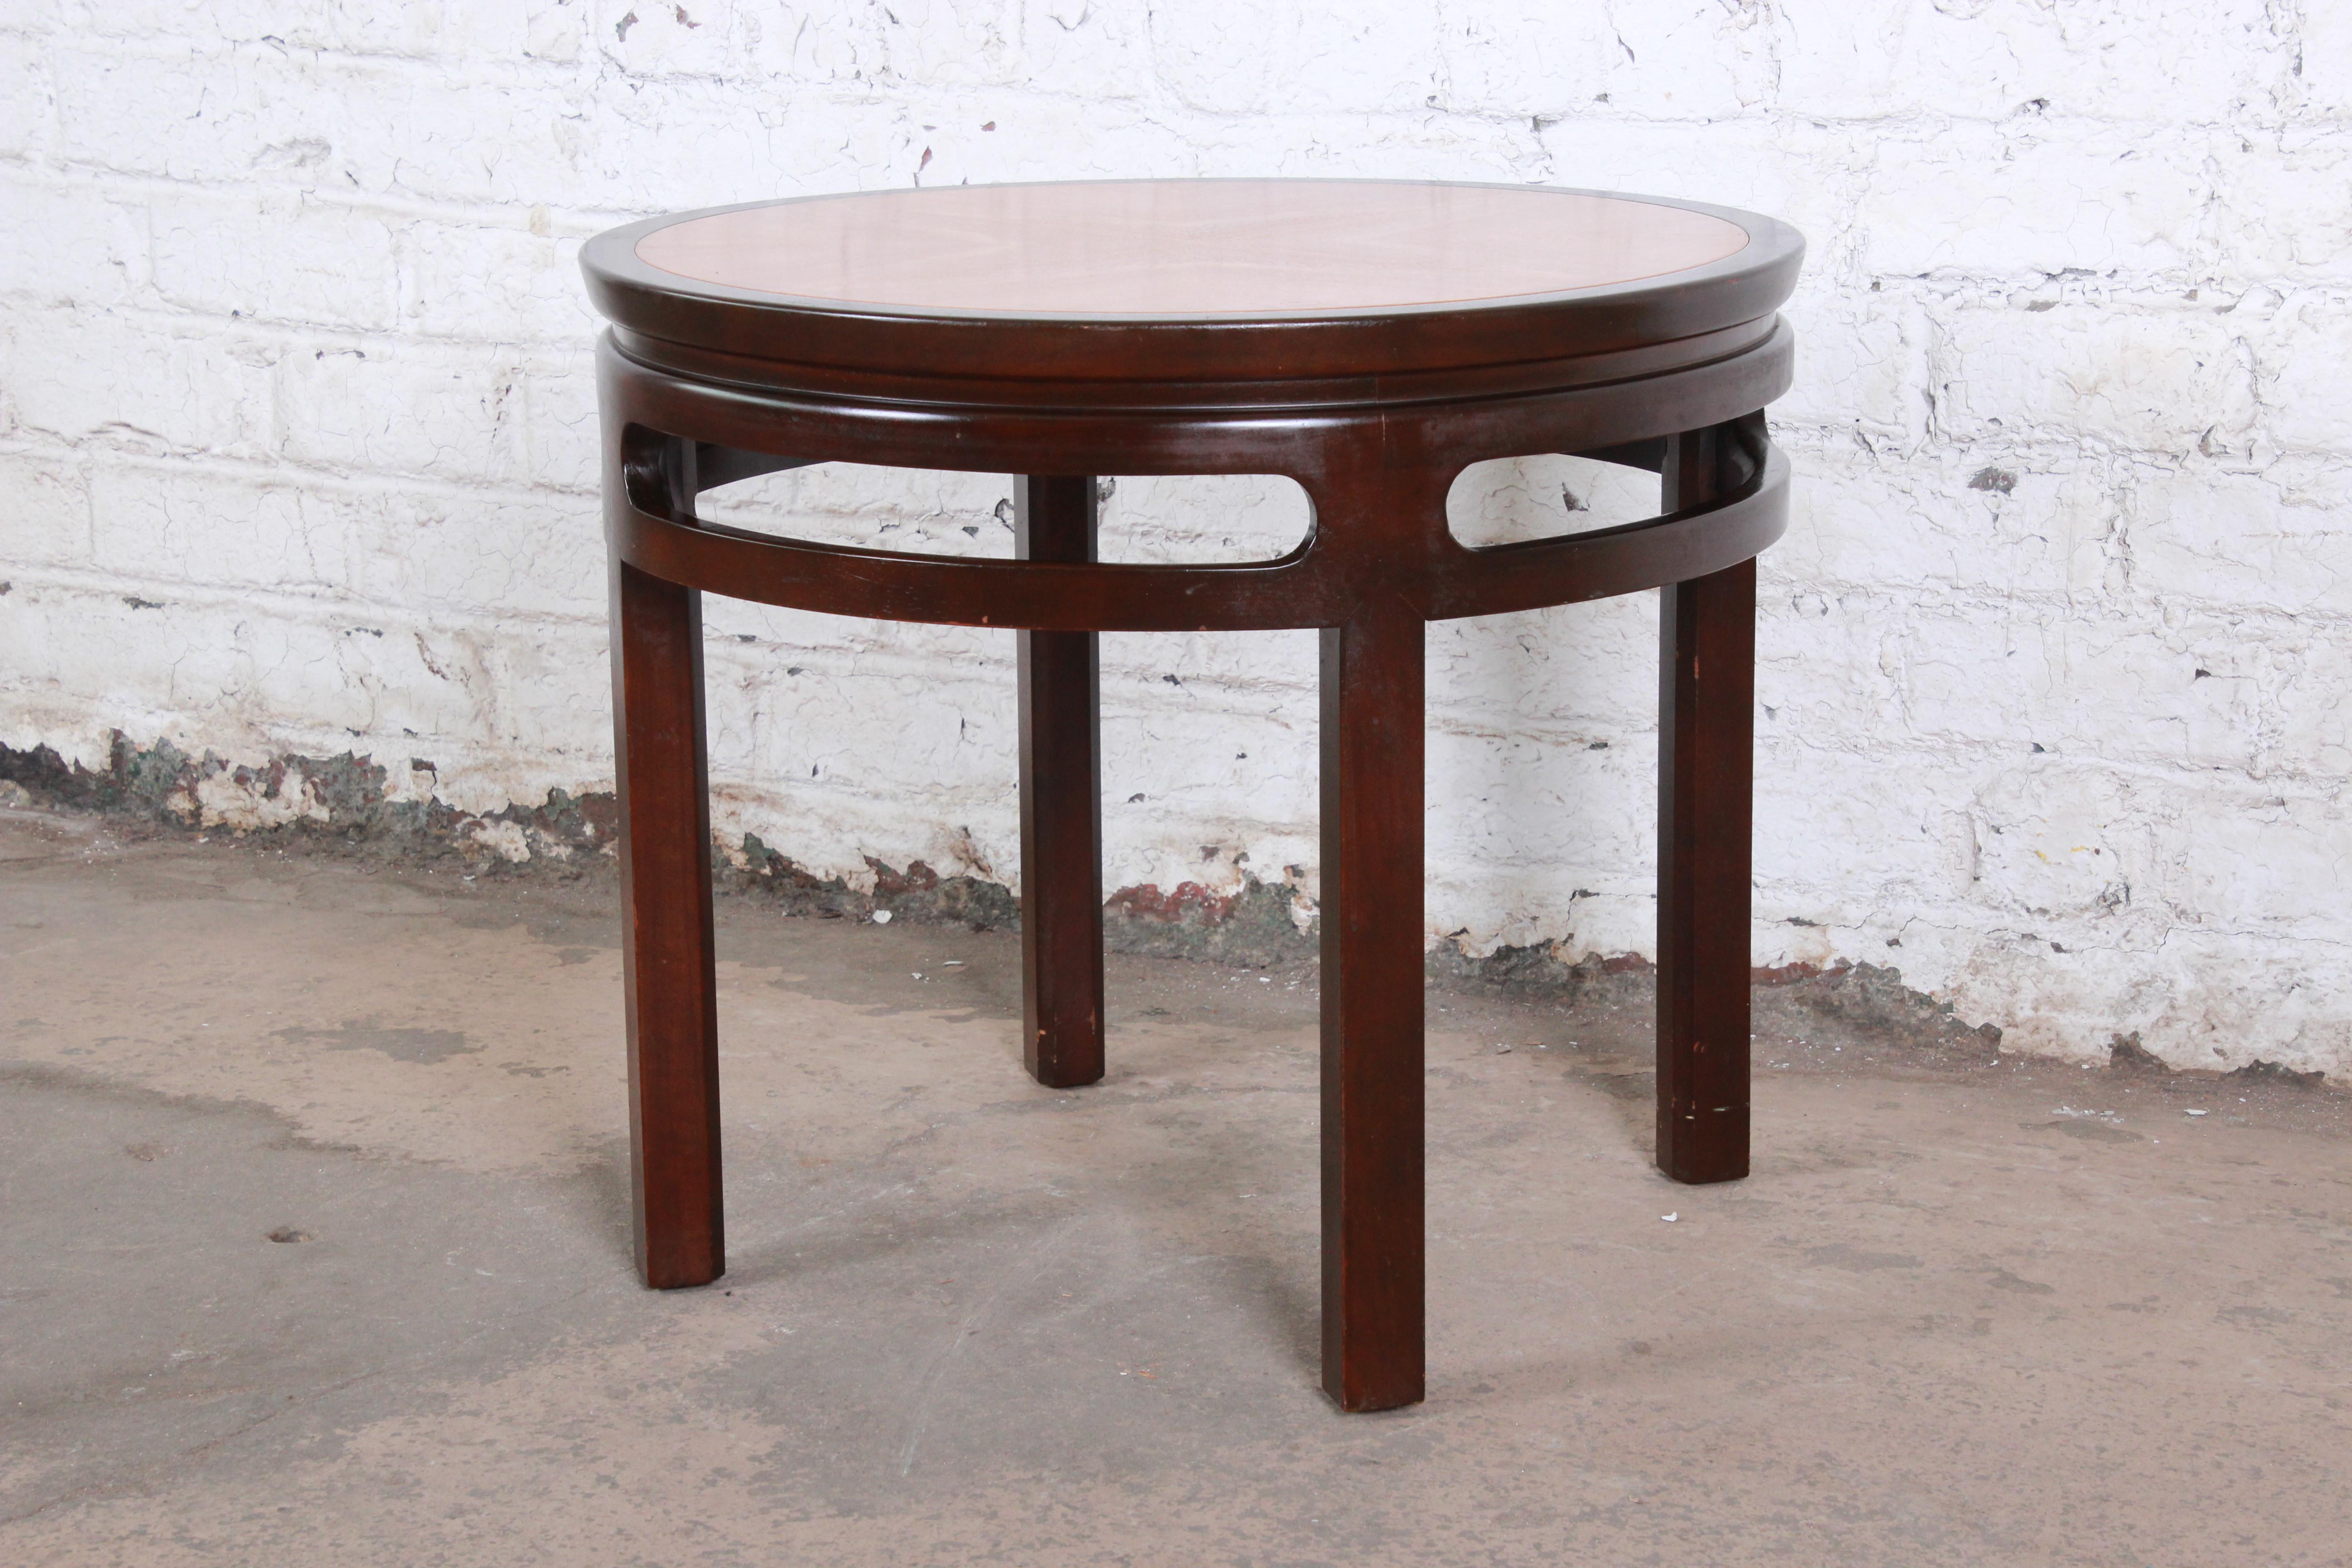 A gorgeous midcentury Hollywood Regency chinoiserie end table by Michael Taylor for Baker Furniture. The table features solid mahogany legs with a stunning book-matched teak top. It has a subtle Asian flair. The original Baker label is present. The